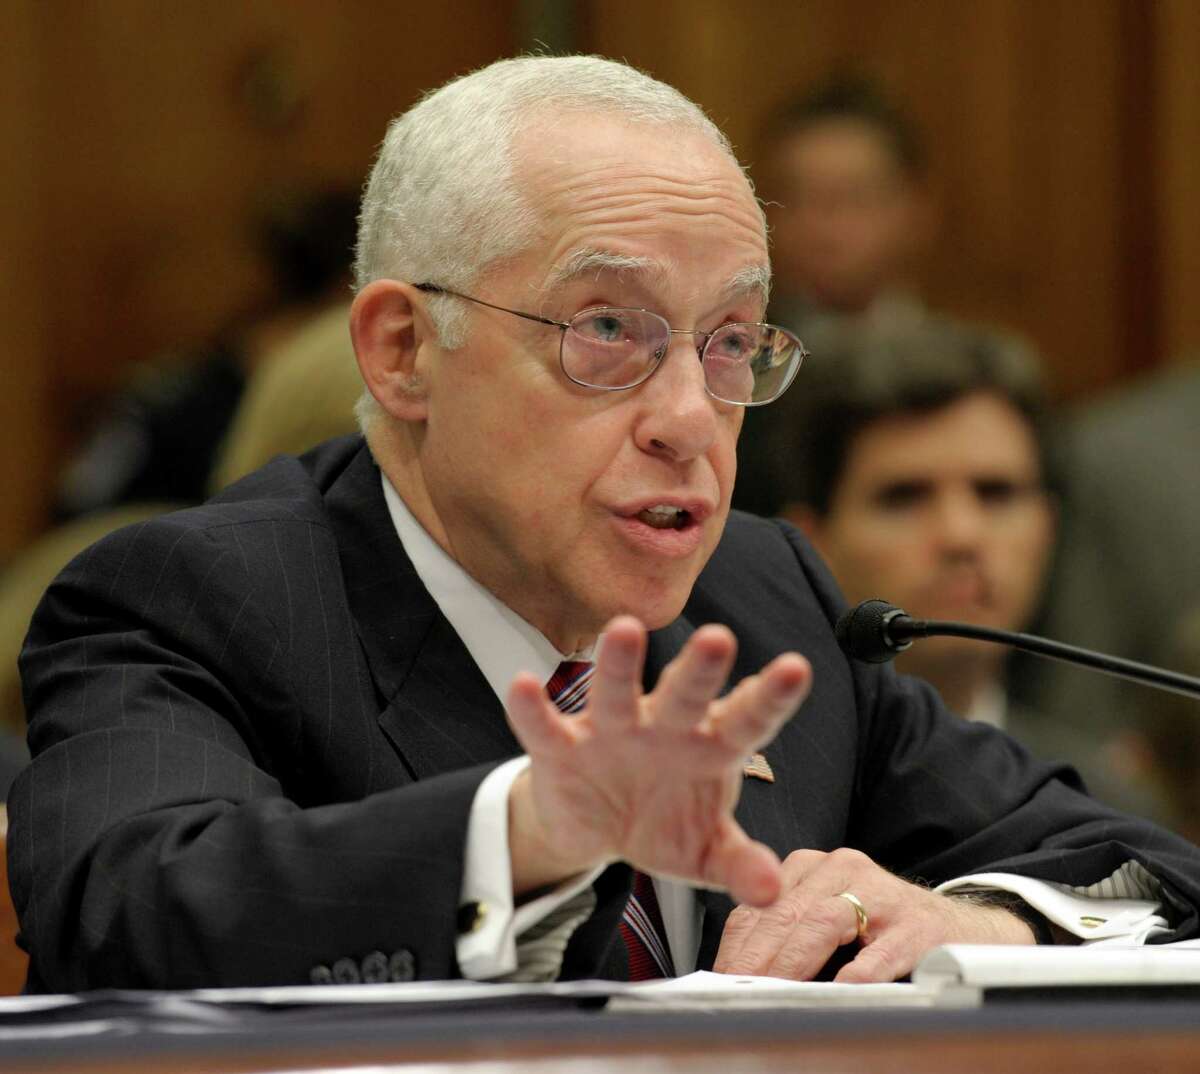 Attorney General Michael Mukasey testifies on Capitol Hill in Washington, Wednesday, July 23, 2008, before the House Judiciary Committee hearing on oversight at the Justice Department. (AP Photo/Susan Walsh)